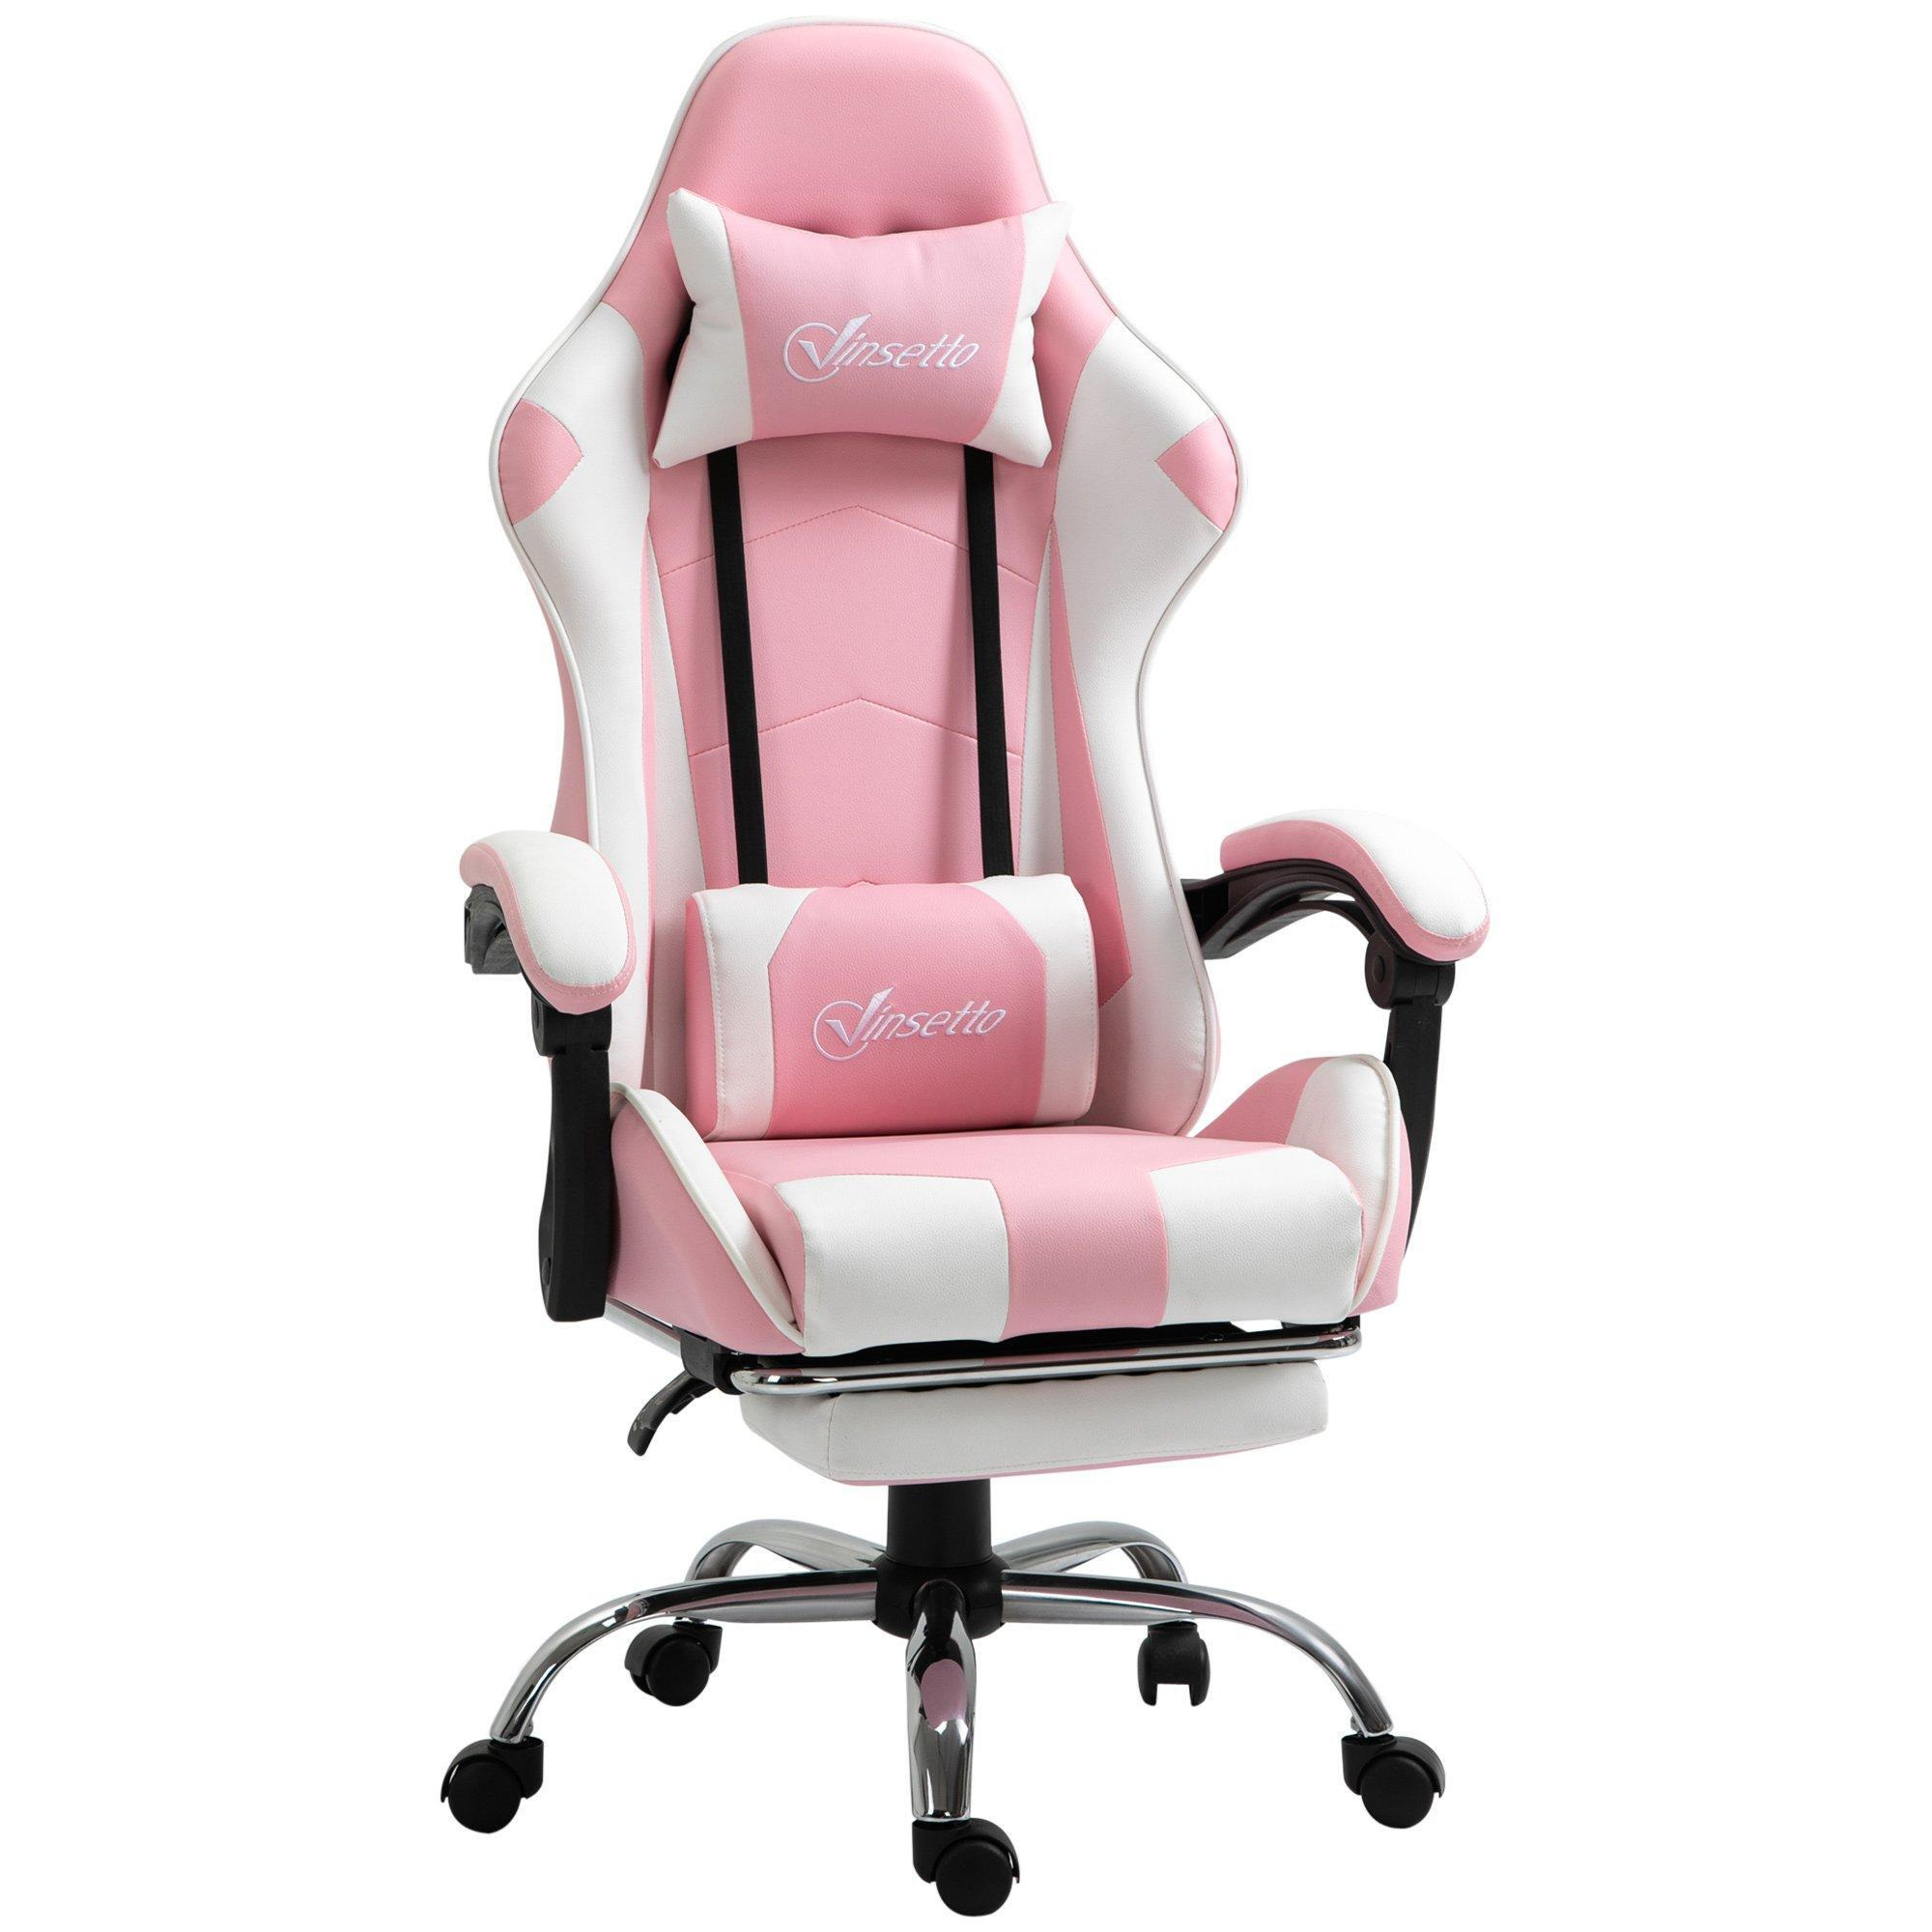 Racing Gaming Chair with Lumbar Support, Home Office Desk - image 1